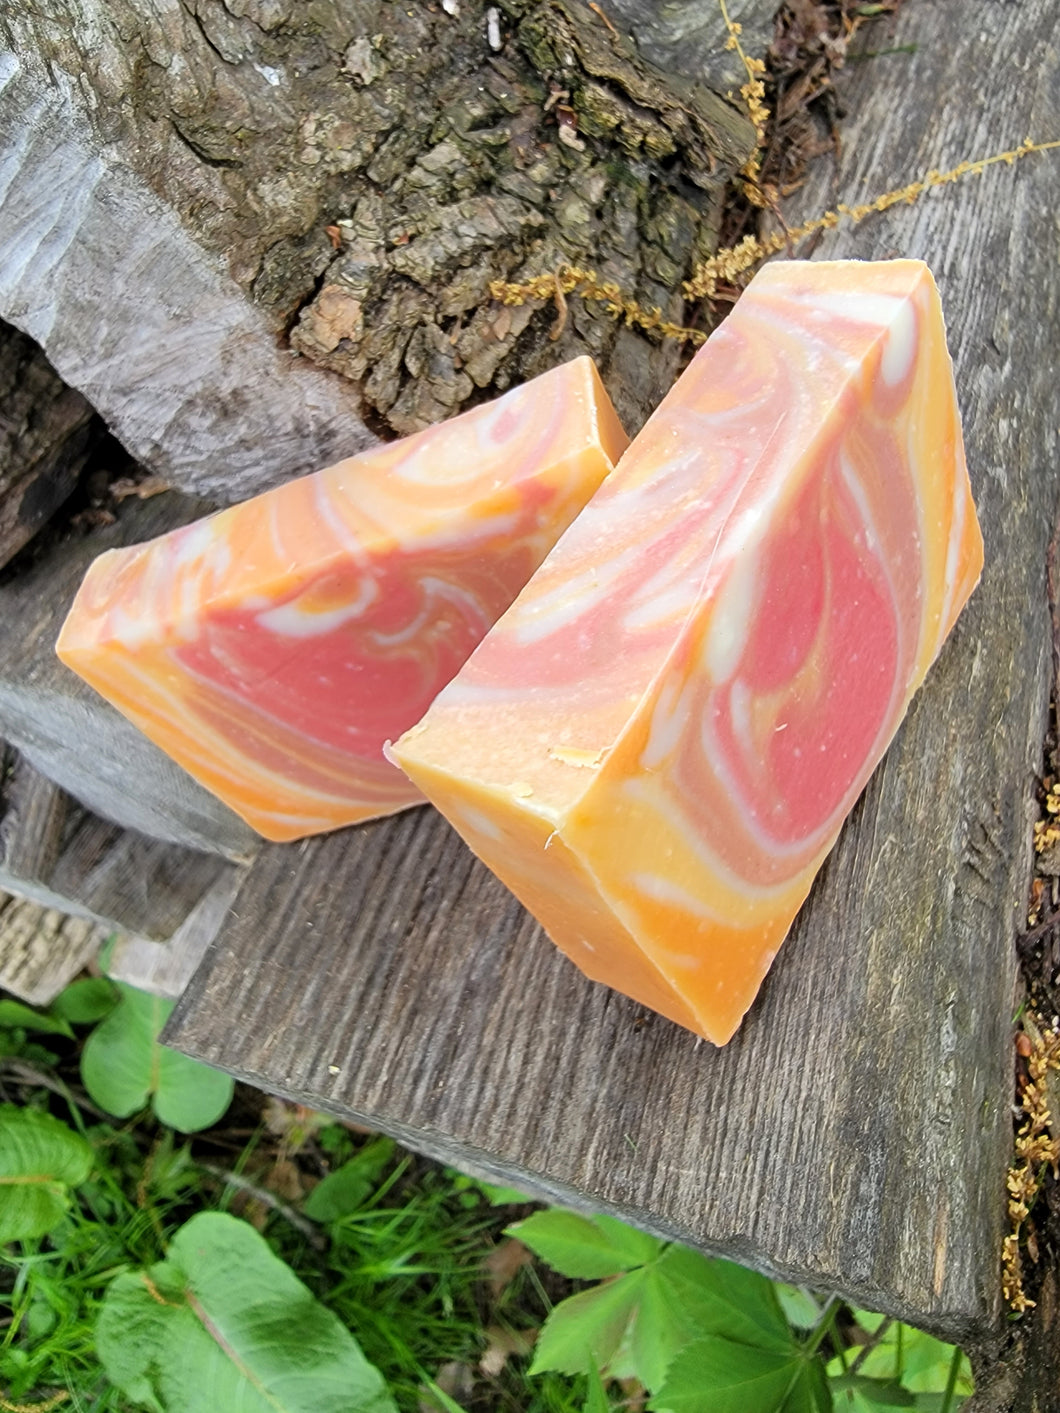 Orange, dark pink and white swirled soap sitting on a piece of wood outside.